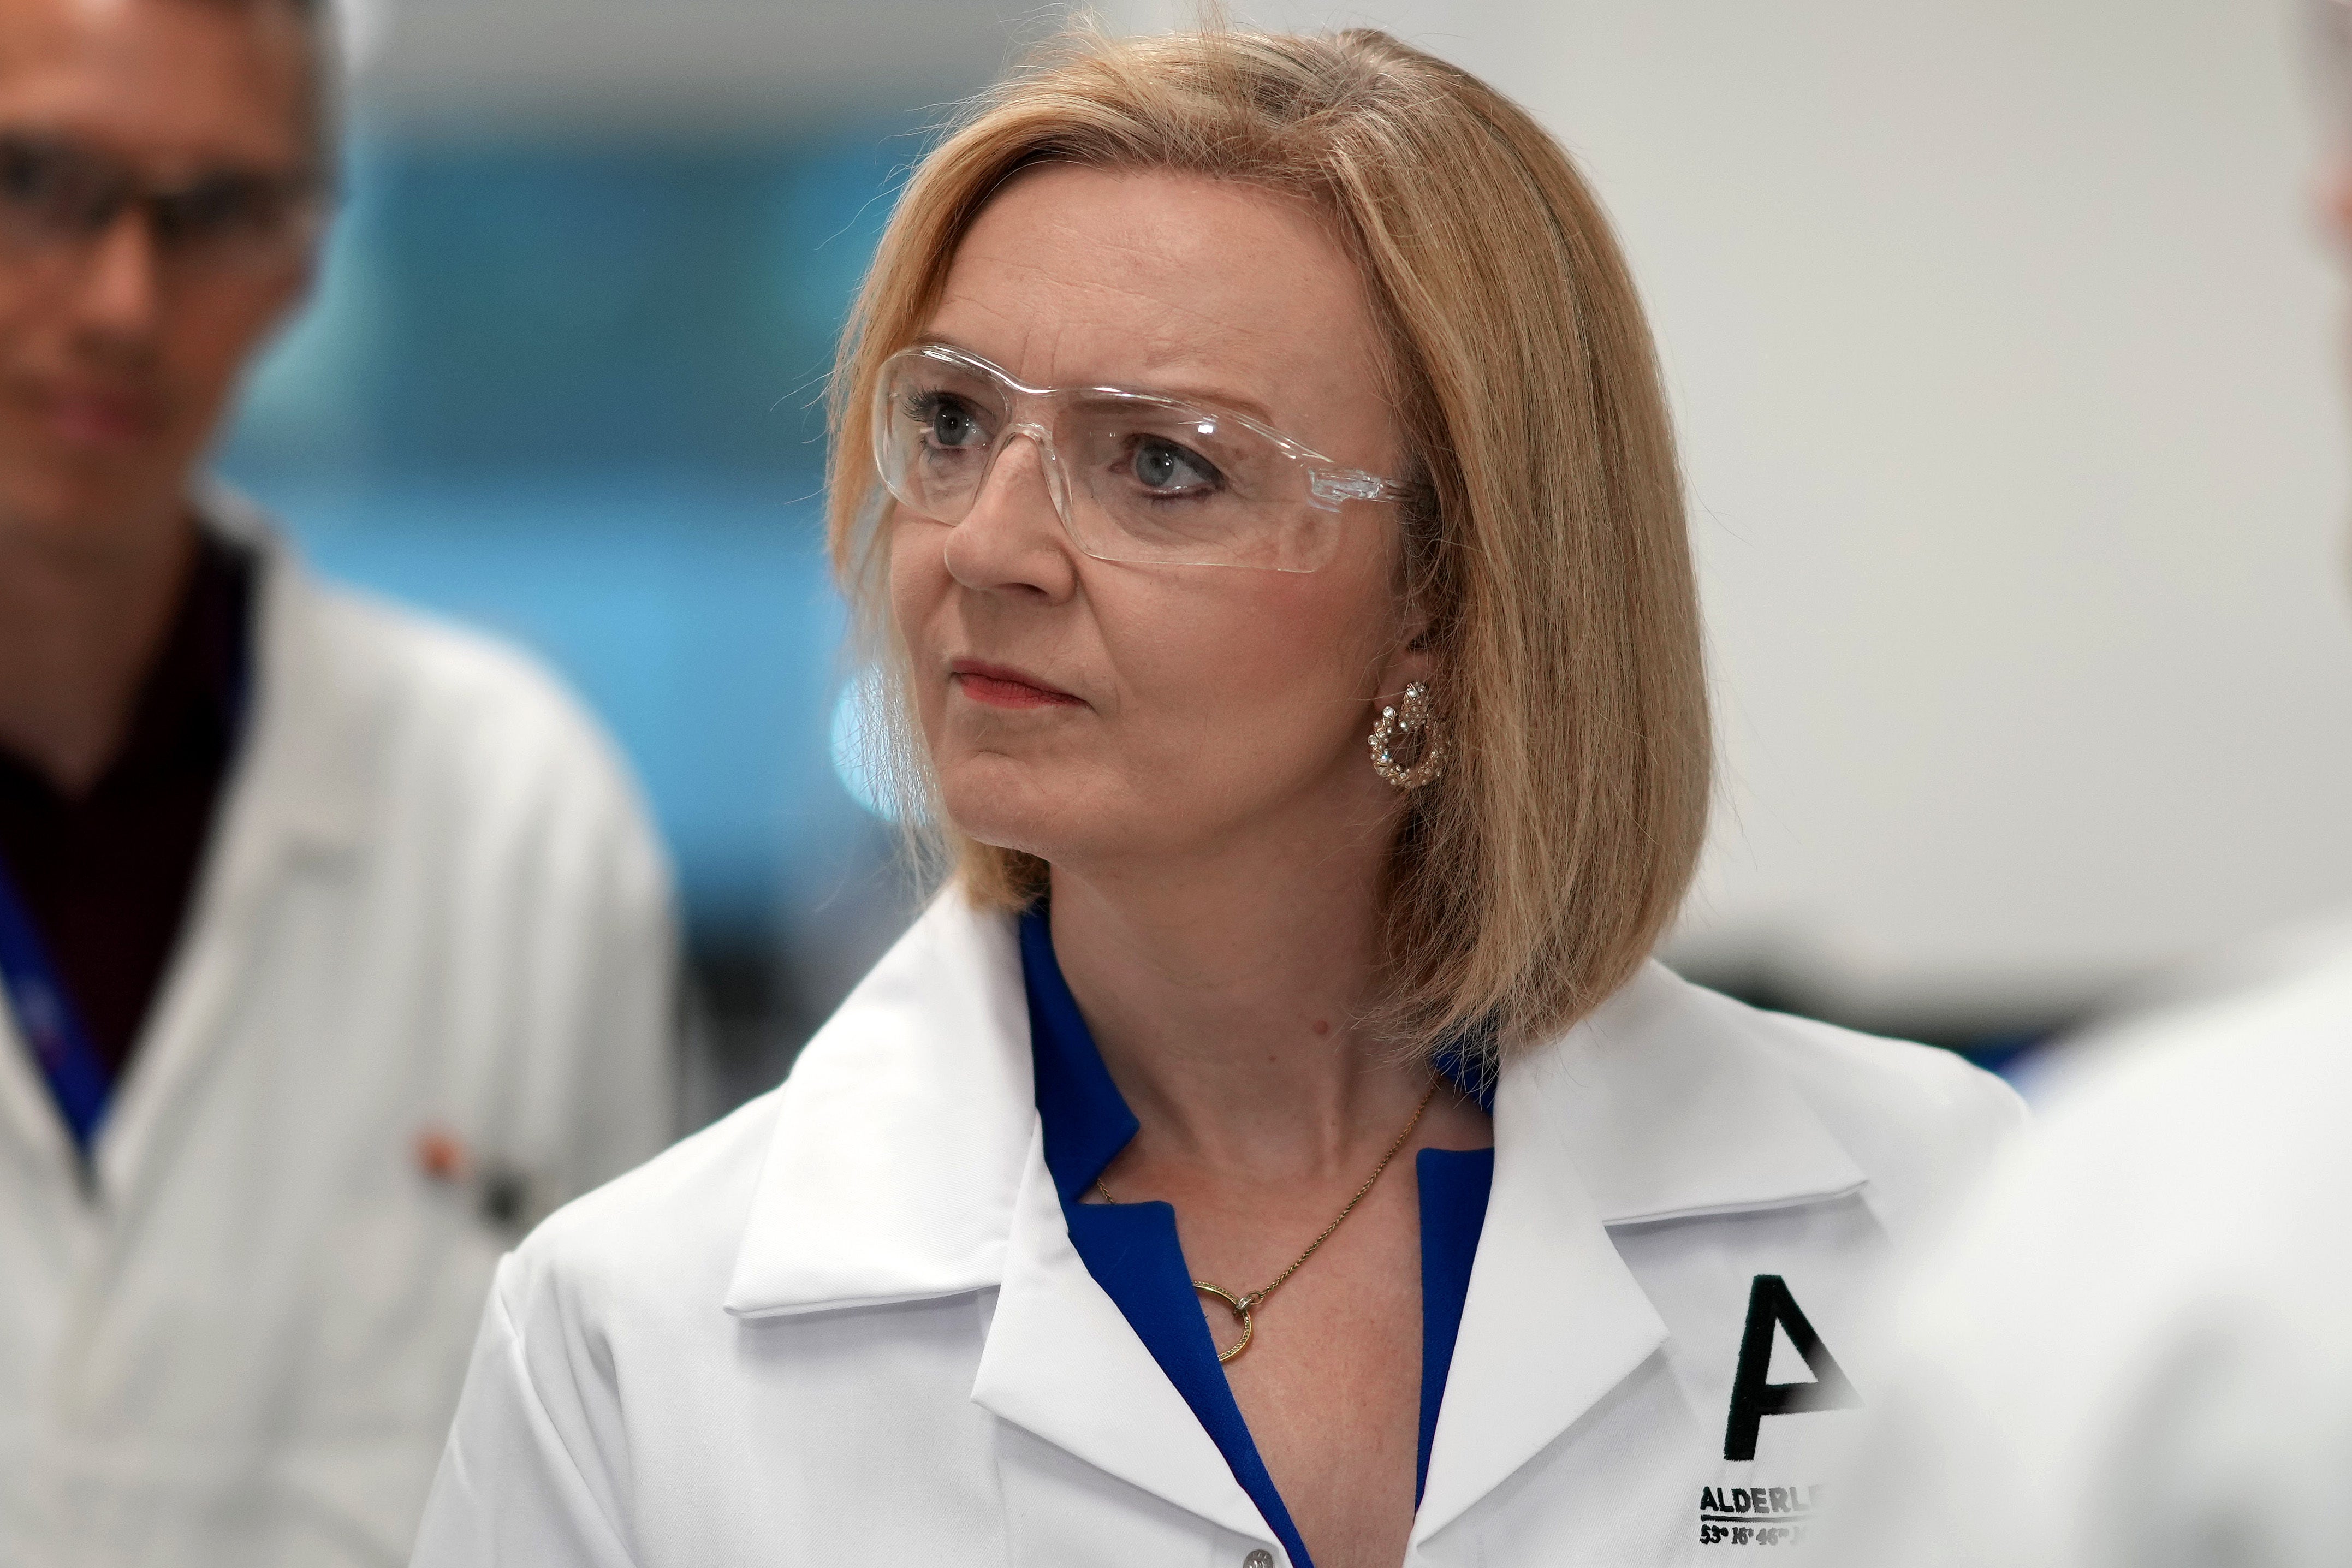 Liz Truss speaks to scientists during a campaign visit to a life sciences laboratory at Alderley Park in Manchester. (Christopher Furlong/PA)